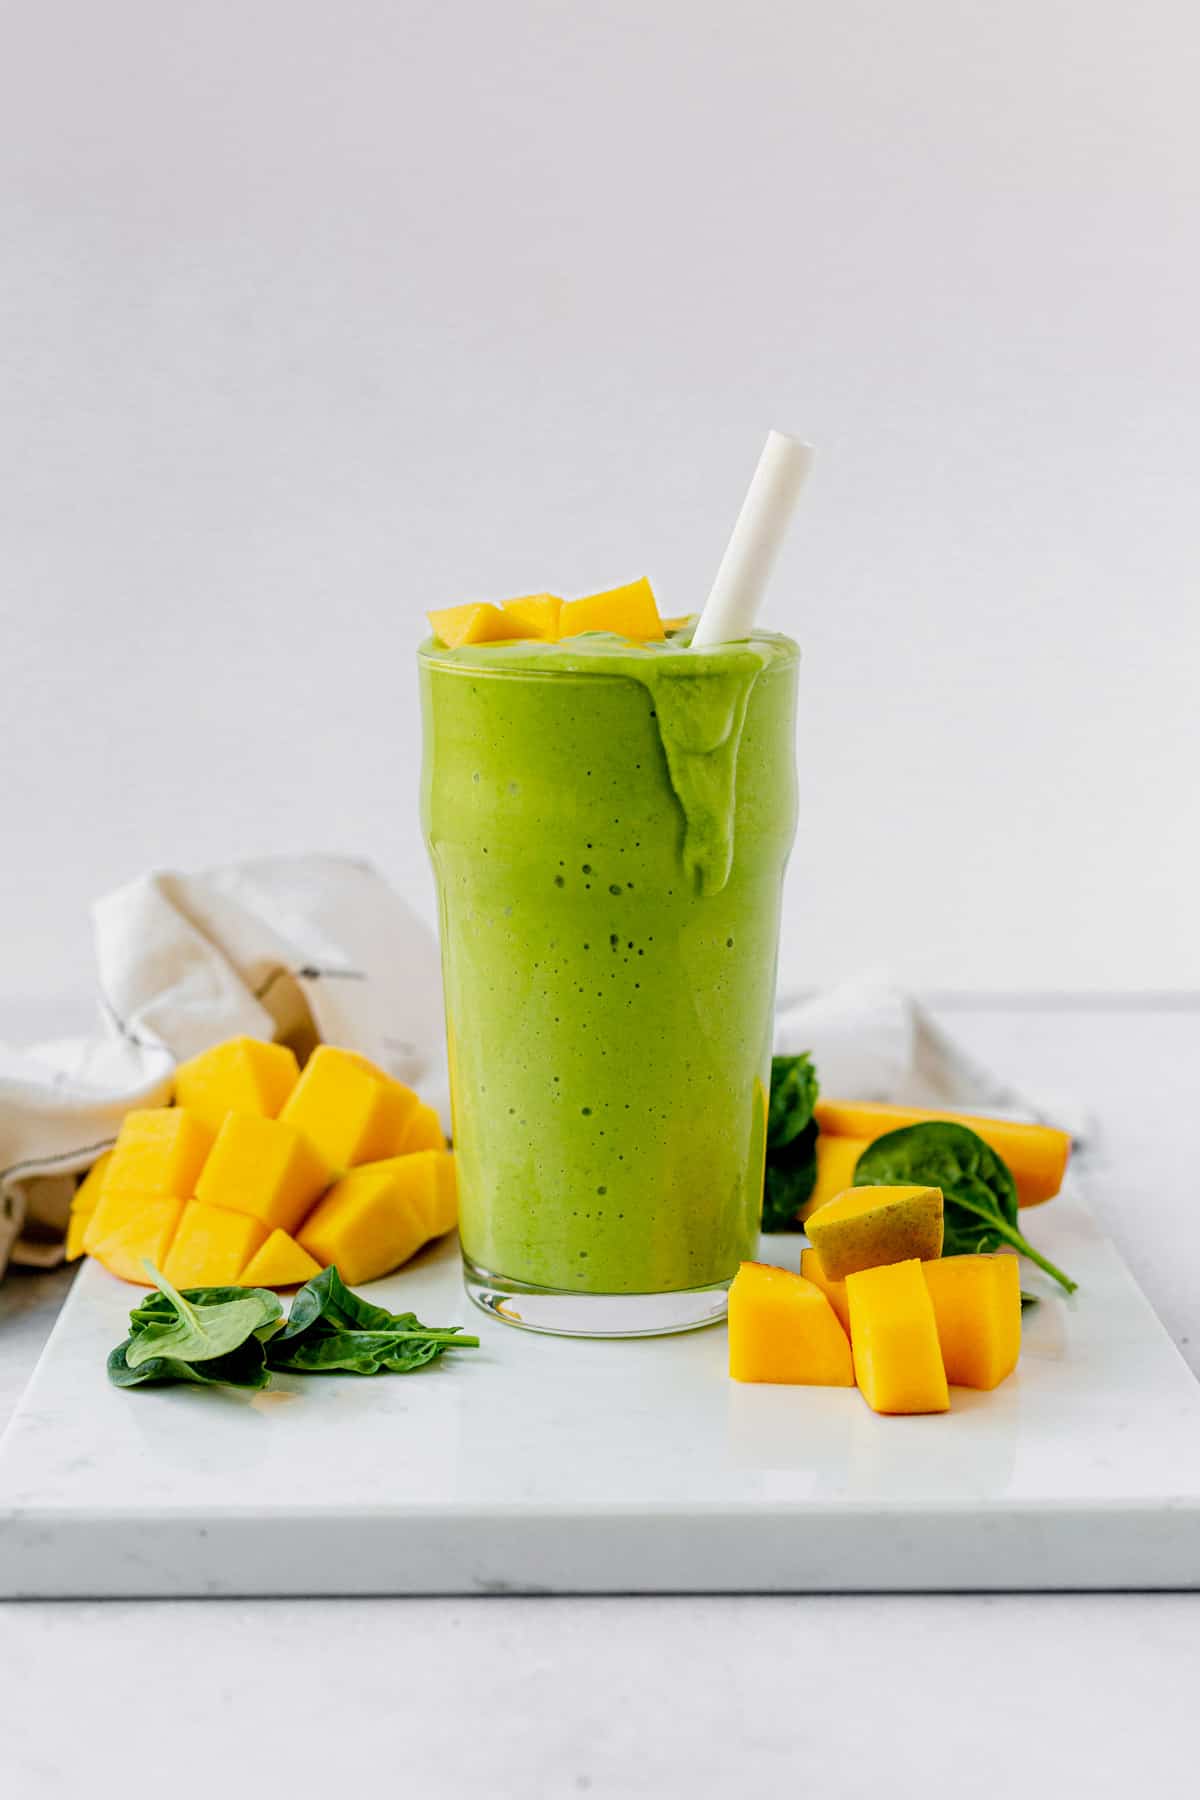 mango spinach smoothie dripping over the side of a glass